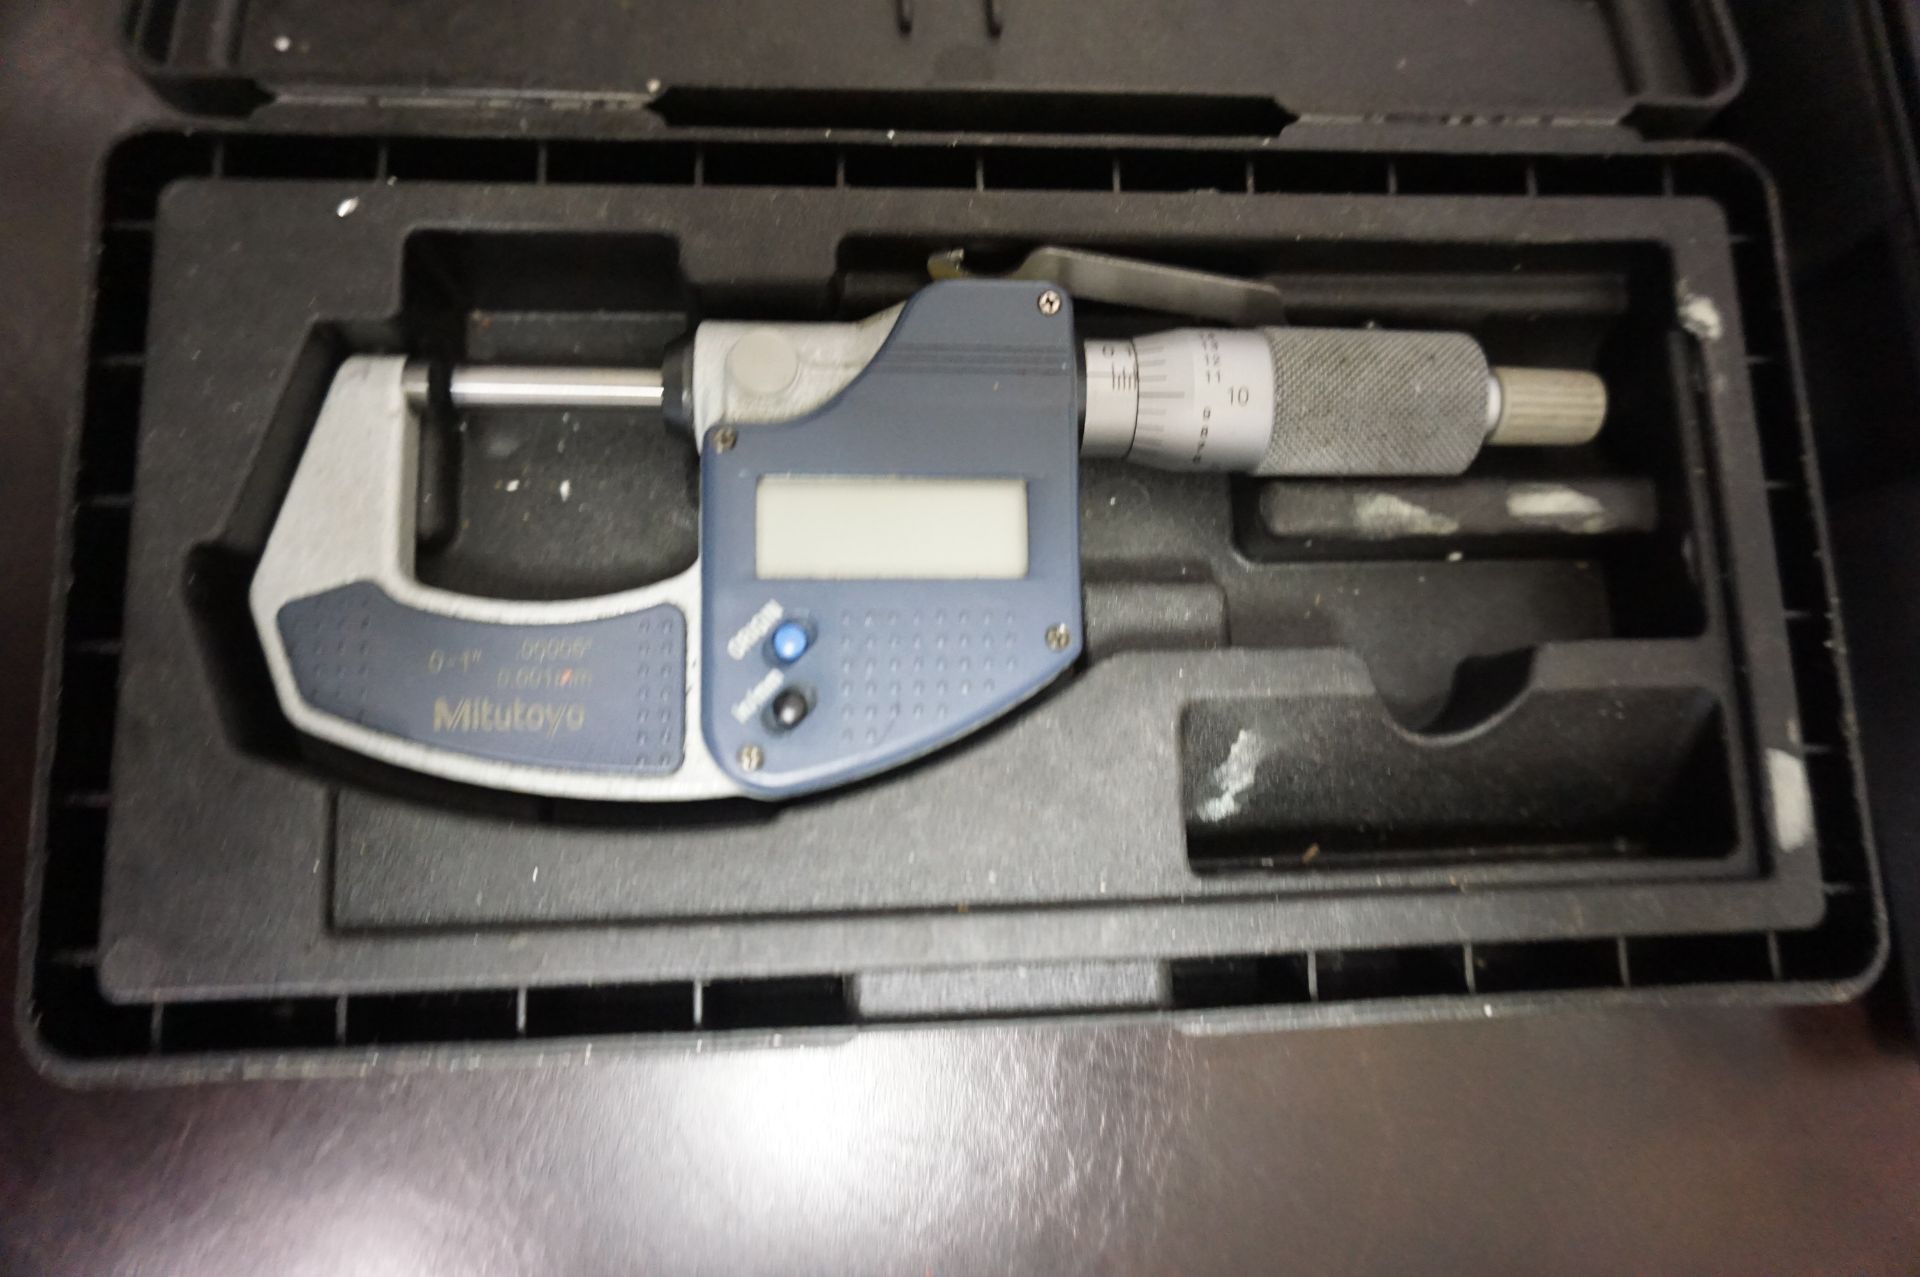 LOT TO INCLUDE: (1) MITUTOYO QUANTUMIKE DIGITAL MICROMETER 0-1", (1) MITUTOYO DIGITAL MICROMETER 0- - Image 2 of 5